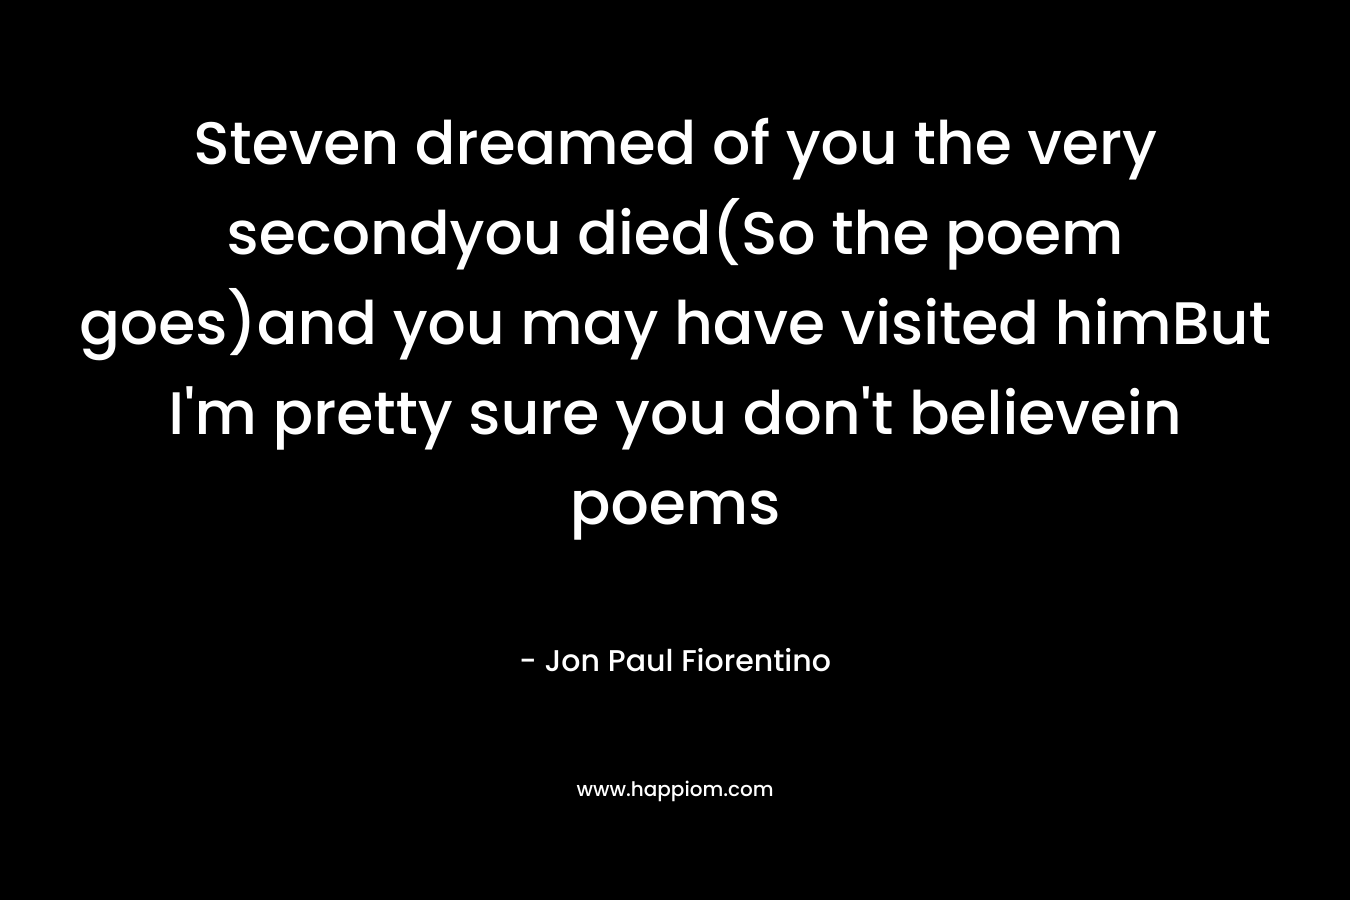 Steven dreamed of you the very secondyou died(So the poem goes)and you may have visited himBut I’m pretty sure you don’t believein poems – Jon Paul Fiorentino